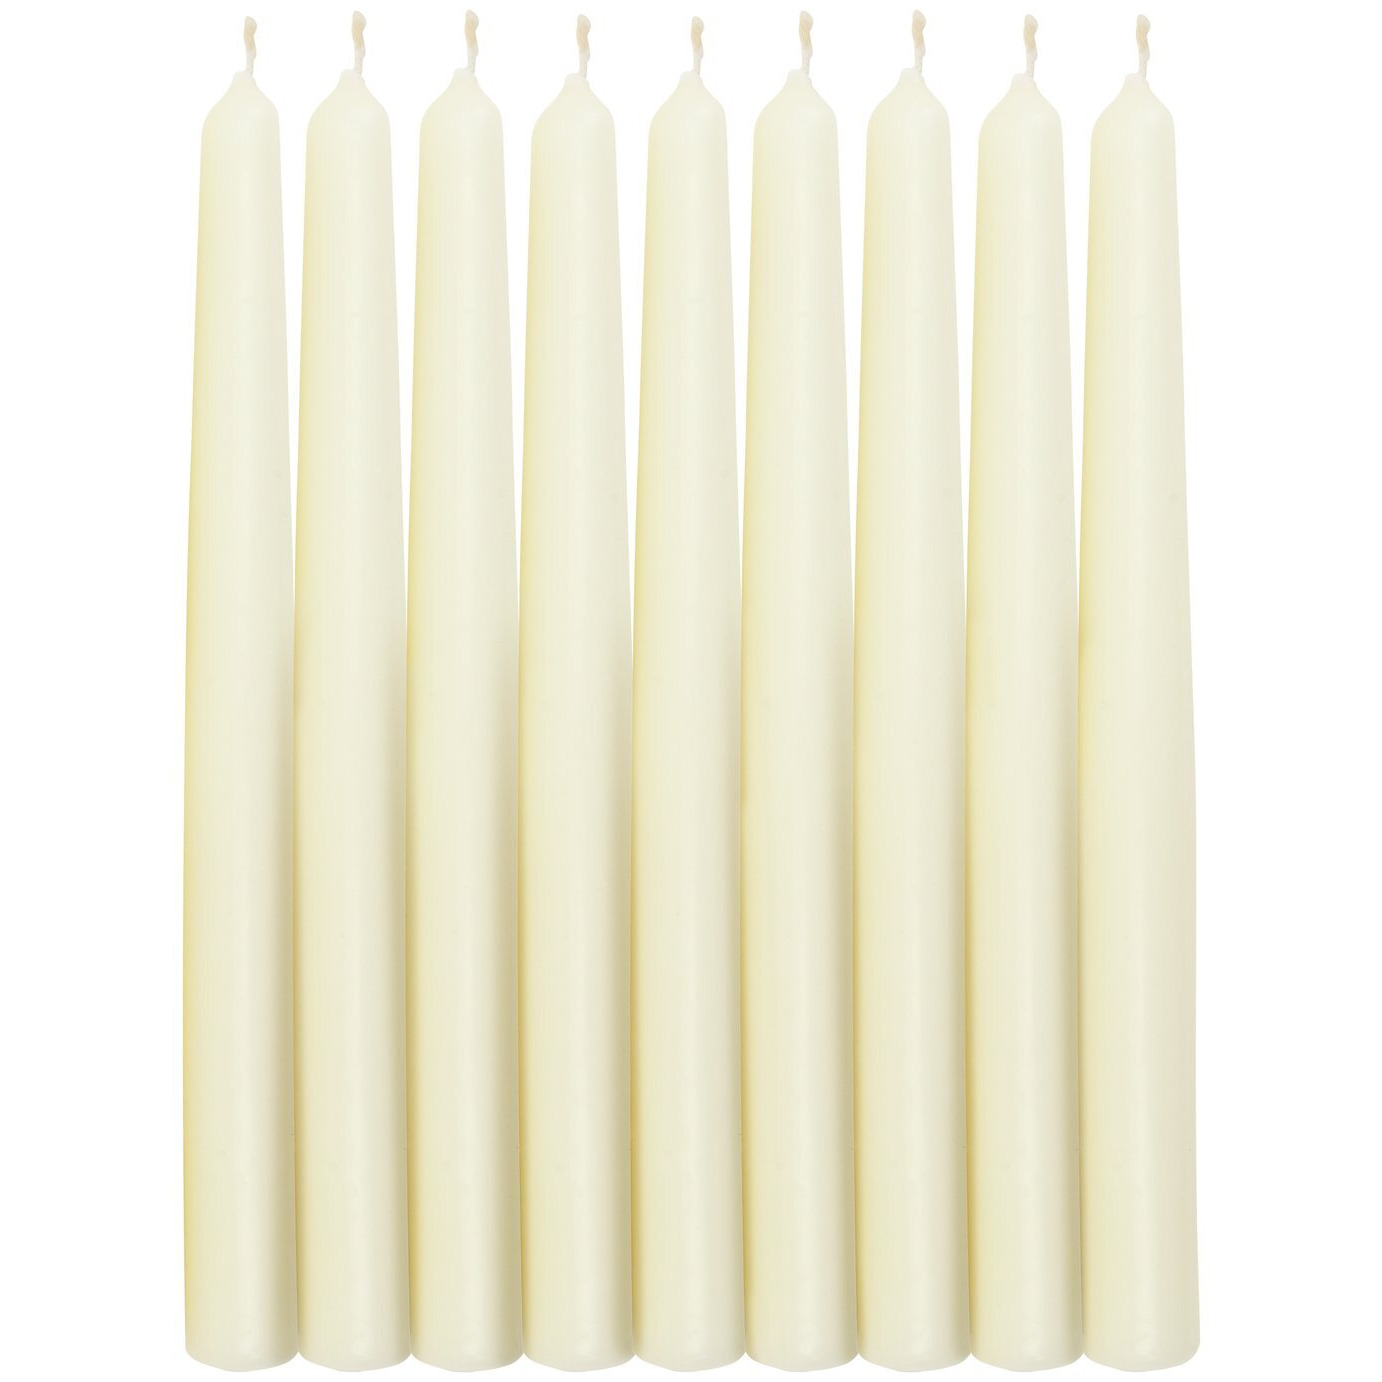 Habitat Tapered Dinner Candles - Ivory - Pack of 10 - image 1